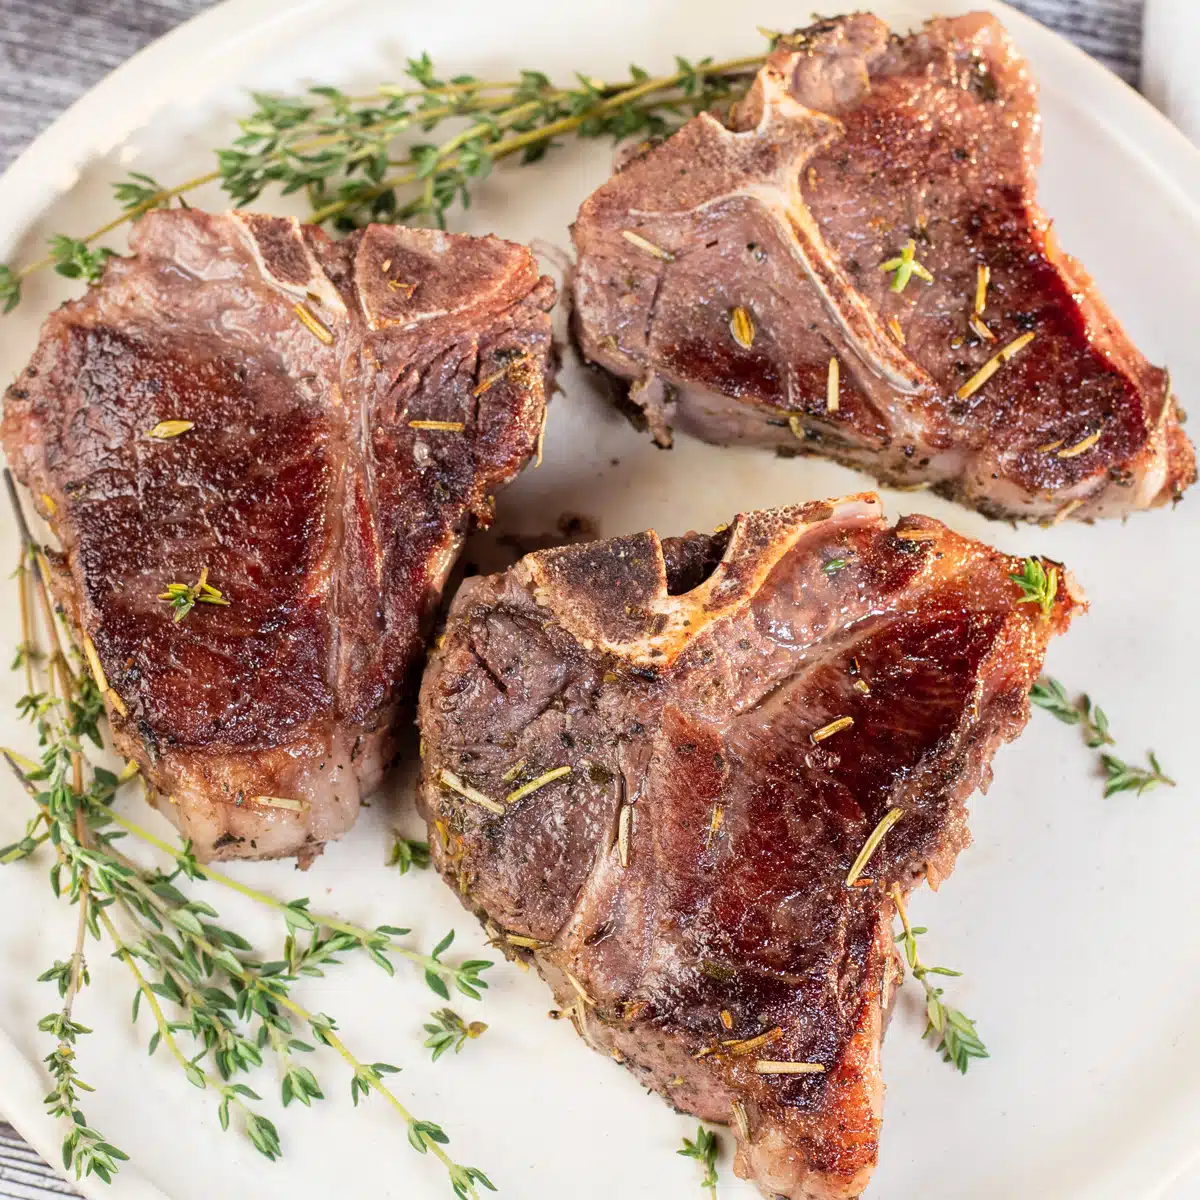 Square image showing sous vide lamb chops on a white plate.